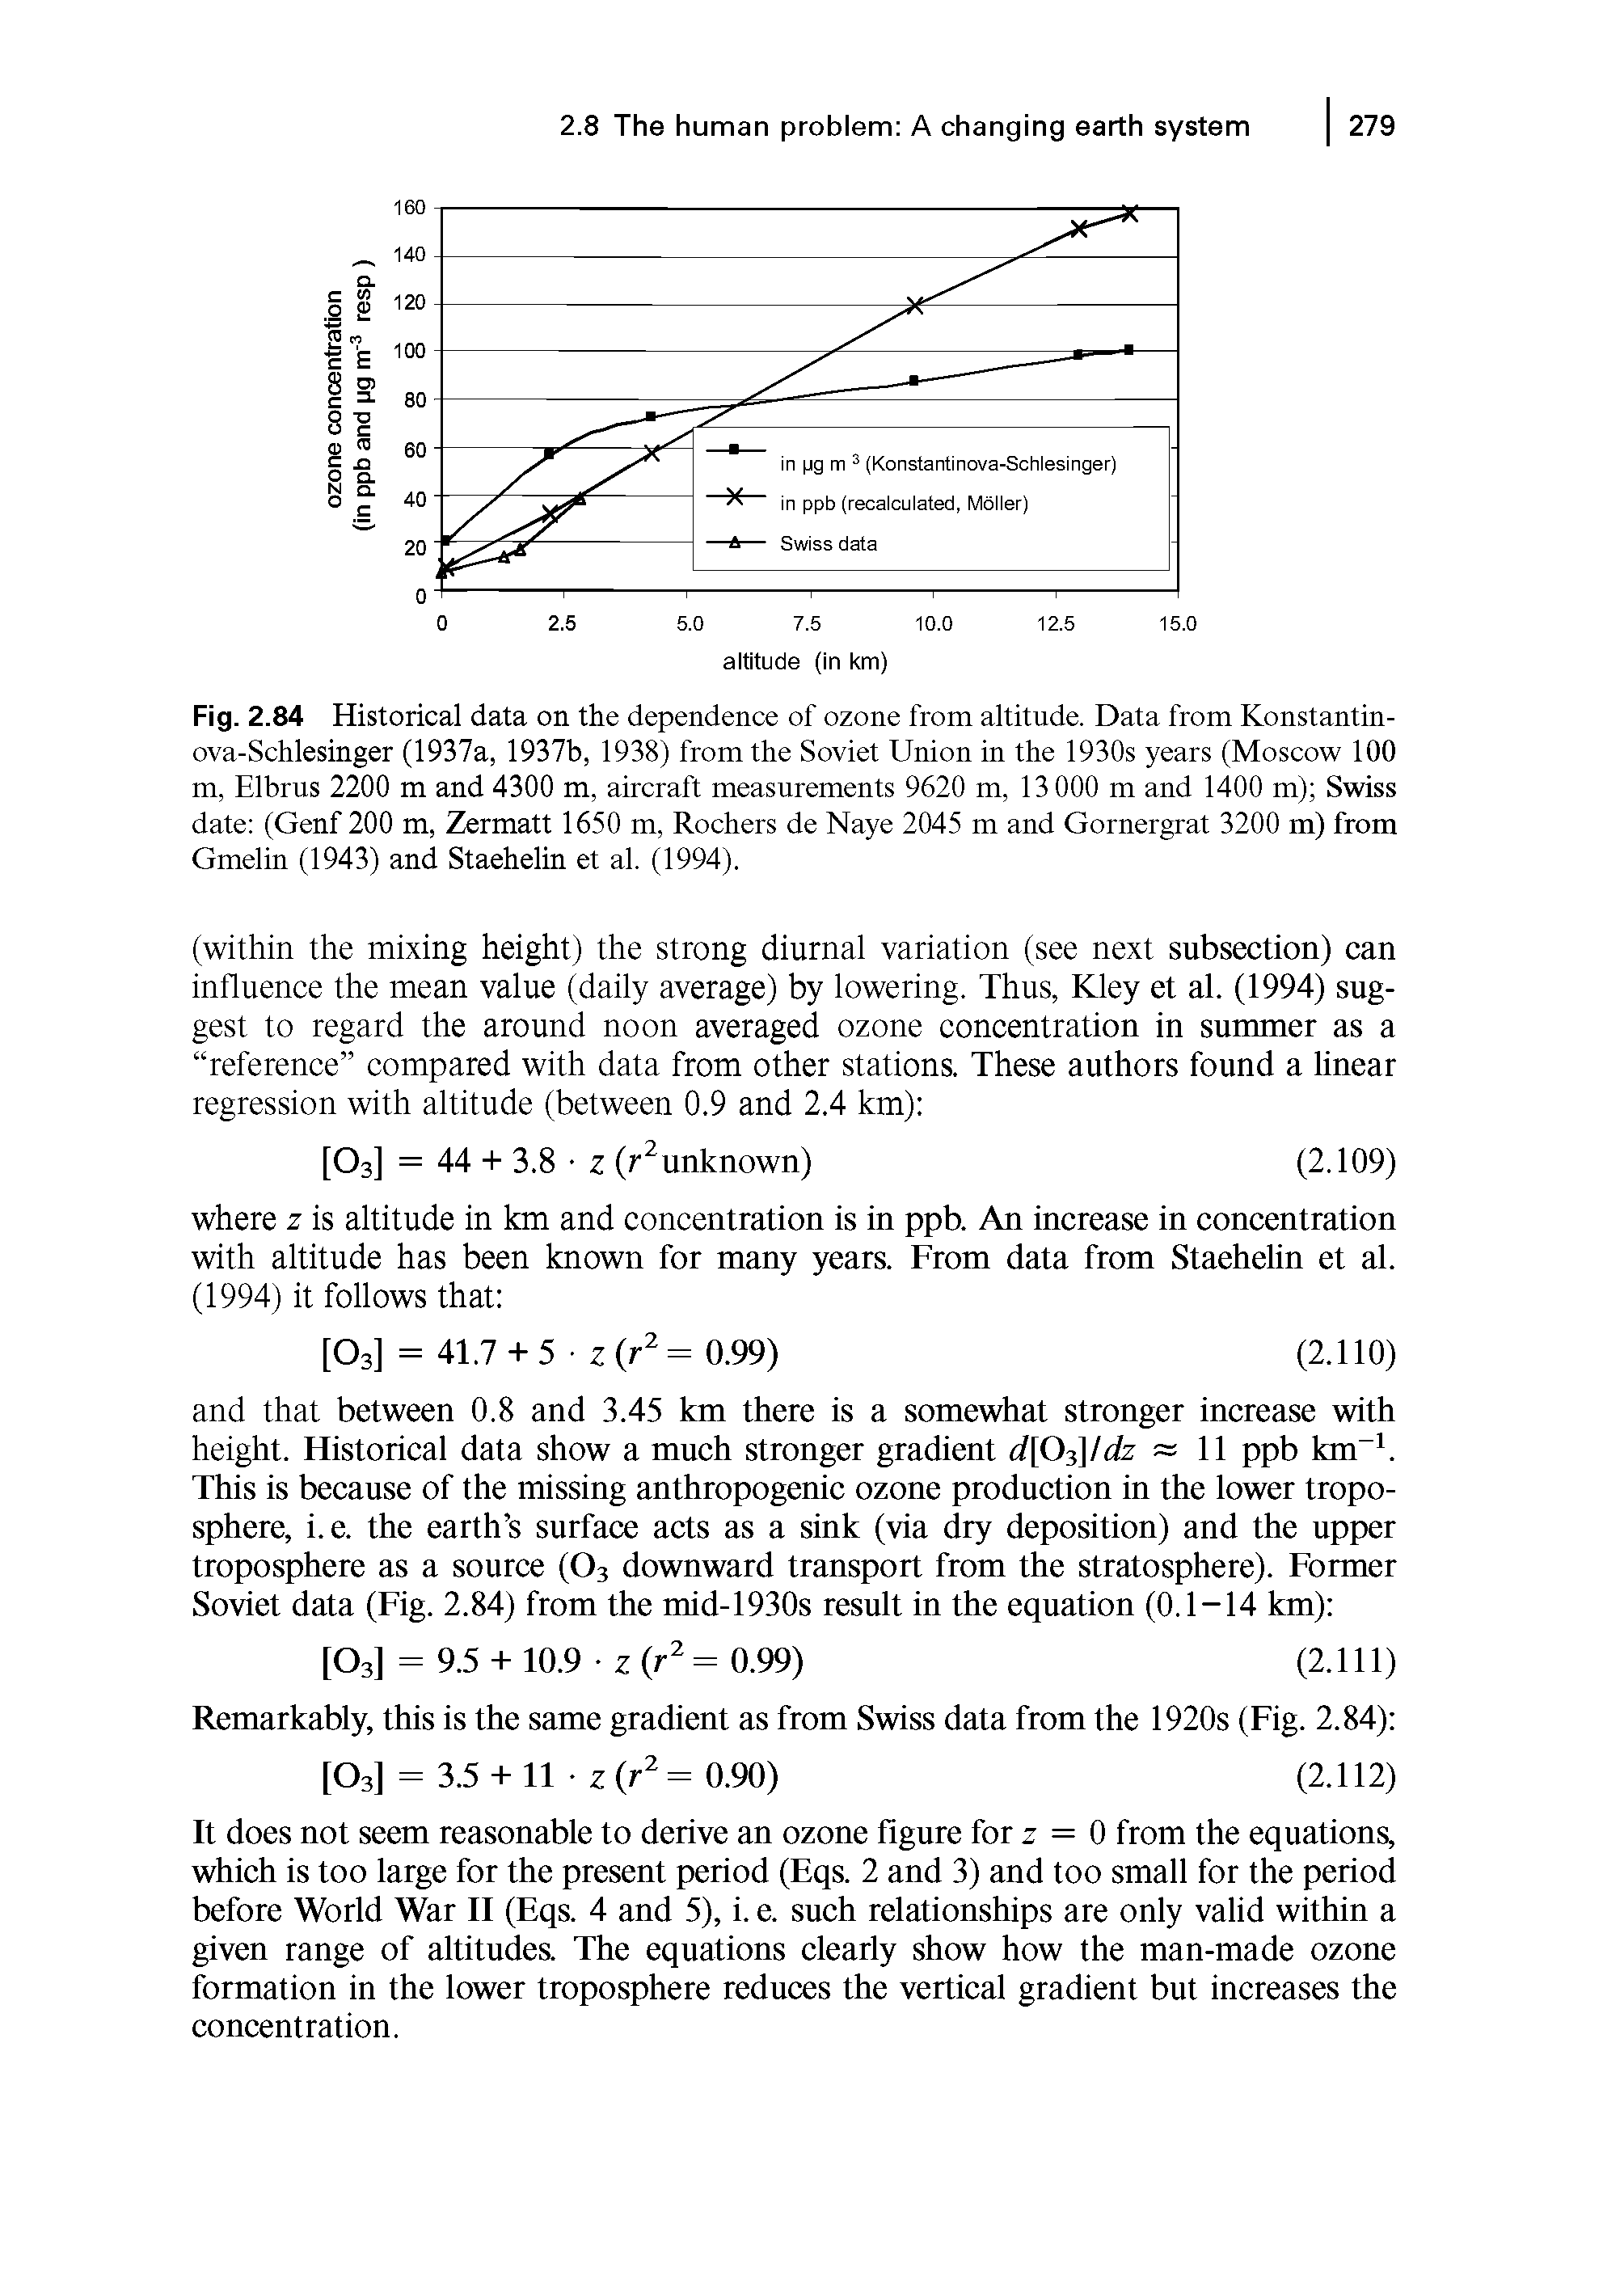 Fig. 2.84 Historical data on the dependence of ozone from altitude. Data from Konstantin-ova-Schlesinger (1937a, 1937b, 1938) from the Soviet Union in the 1930s years (Moscow 100 m, Elbrus 2200 m and 4300 m, aircraft measurements 9620 m, 13 000 m and 1400 m) Swiss date (Genf 200 m, Zermatt 1650 m, Rochers de Naye 2045 m and Gornergrat 3200 m) from Gmelin (1943) and Staehelin et al. (1994).